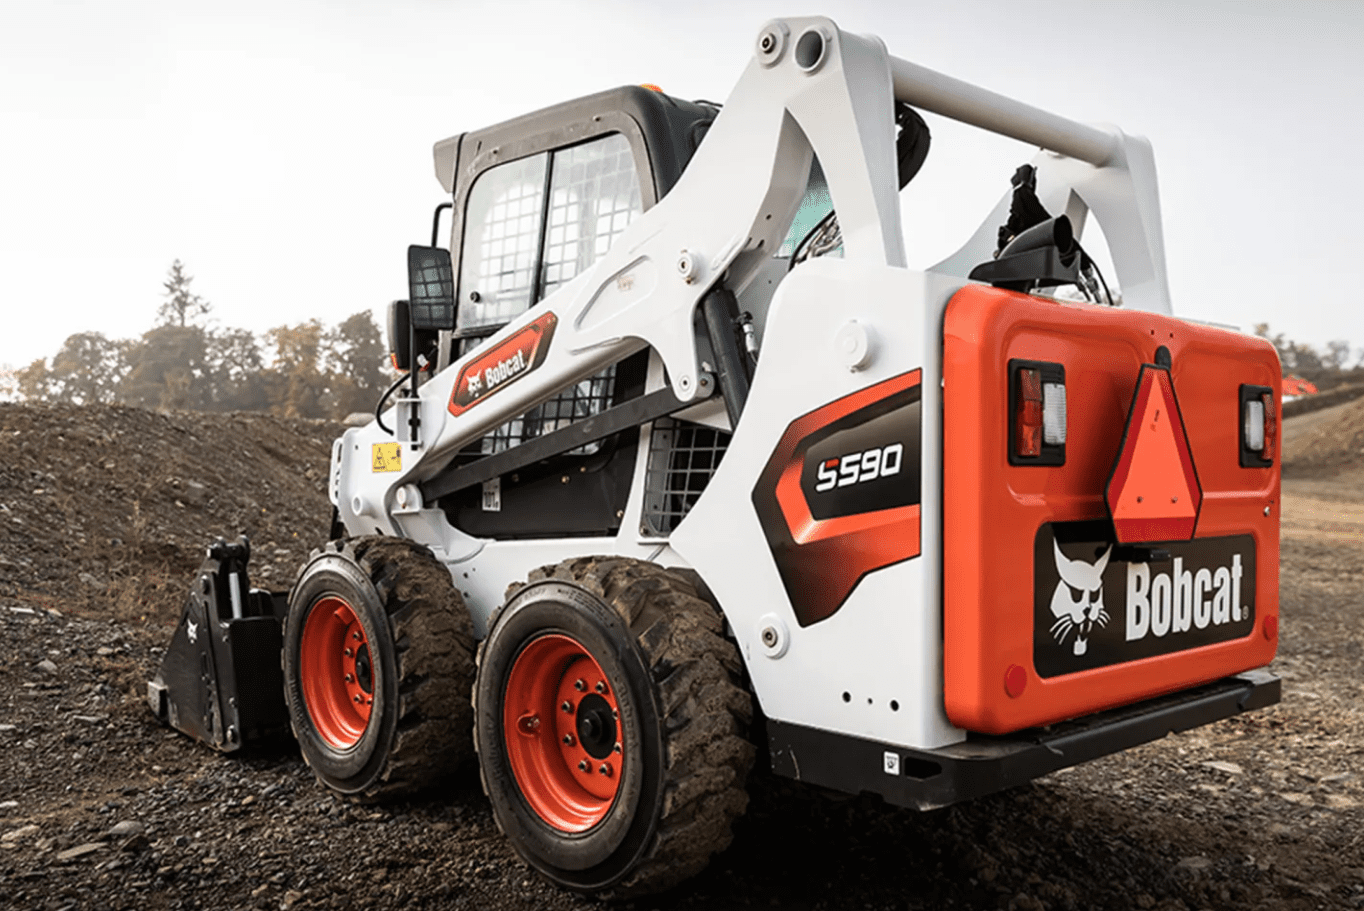 Browse Specs and more for the Bobcat S590 Skid-Steer Loader - White Star Machinery